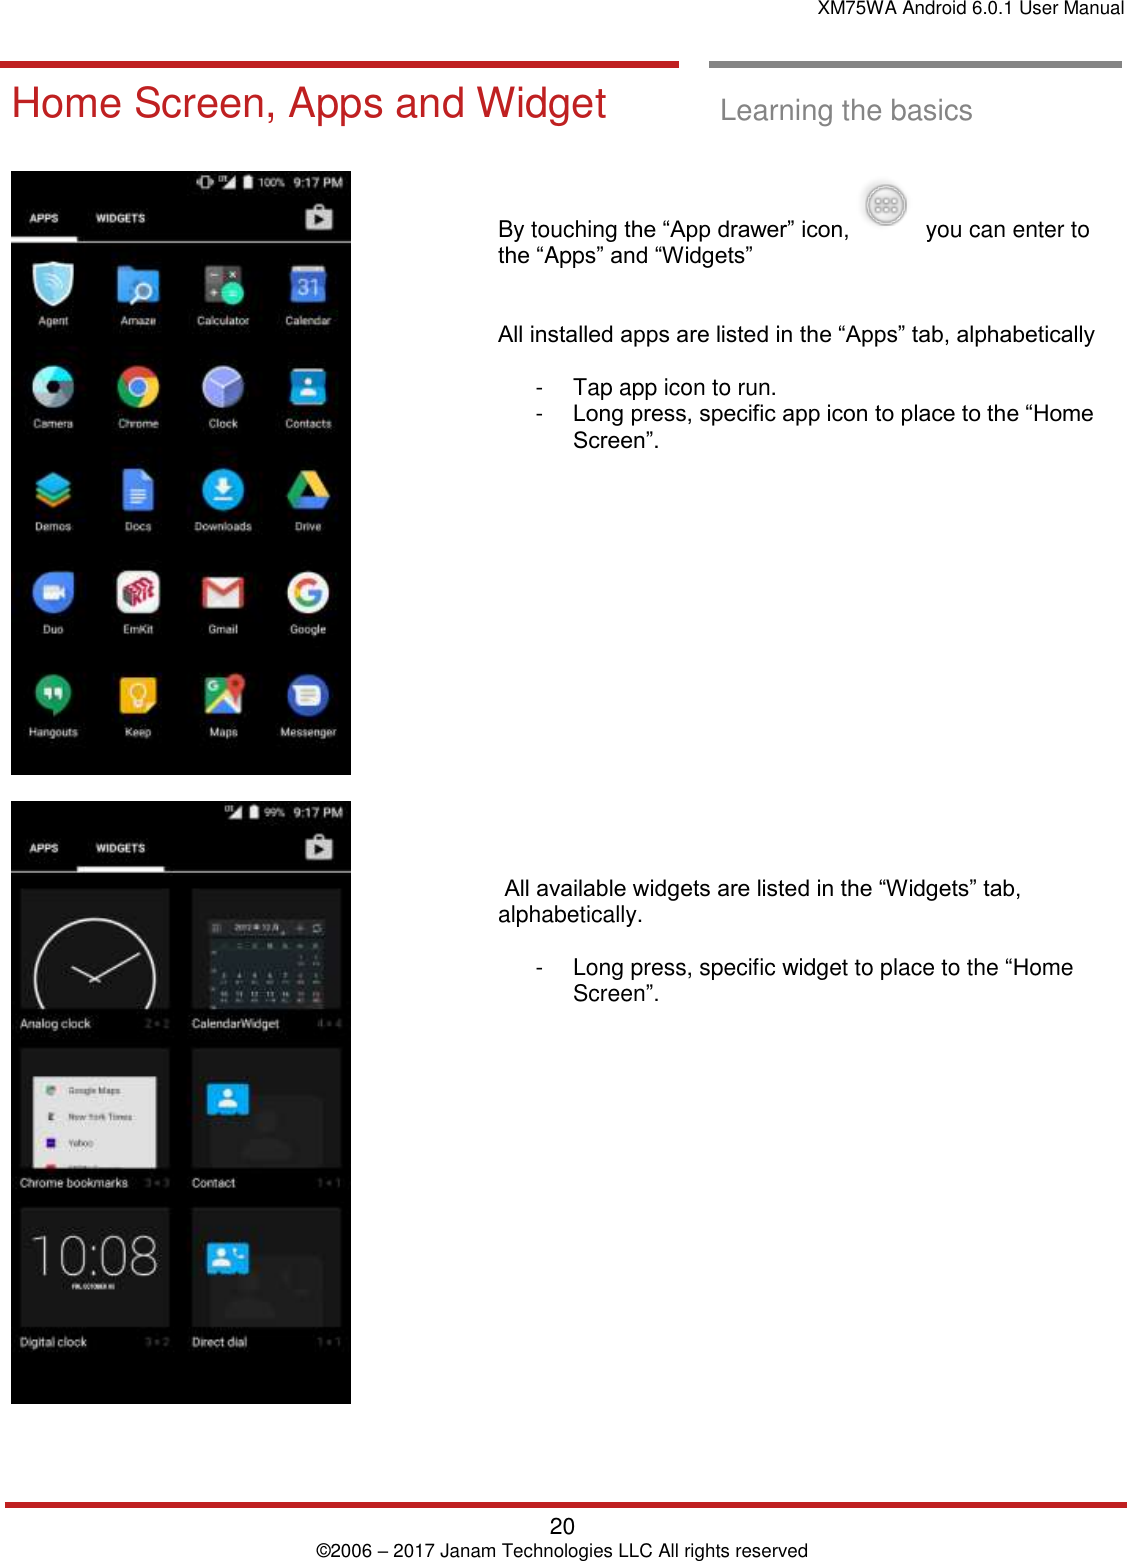 XM75WA Android 6.0.1 User Manual   20 © 2006 – 2017 Janam Technologies LLC All rights reserved  Learning the basics  Home Screen, Apps and Widget  Learning the basics      By touching the “App drawer” icon,     you can enter to the “Apps” and “Widgets”    All installed apps are listed in the “Apps” tab, alphabetically   -  Tap app icon to run.  -  Long press, specific app icon to place to the “Home Screen”.                   All available widgets are listed in the “Widgets” tab, alphabetically.   -  Long press, specific widget to place to the “Home Screen”.  